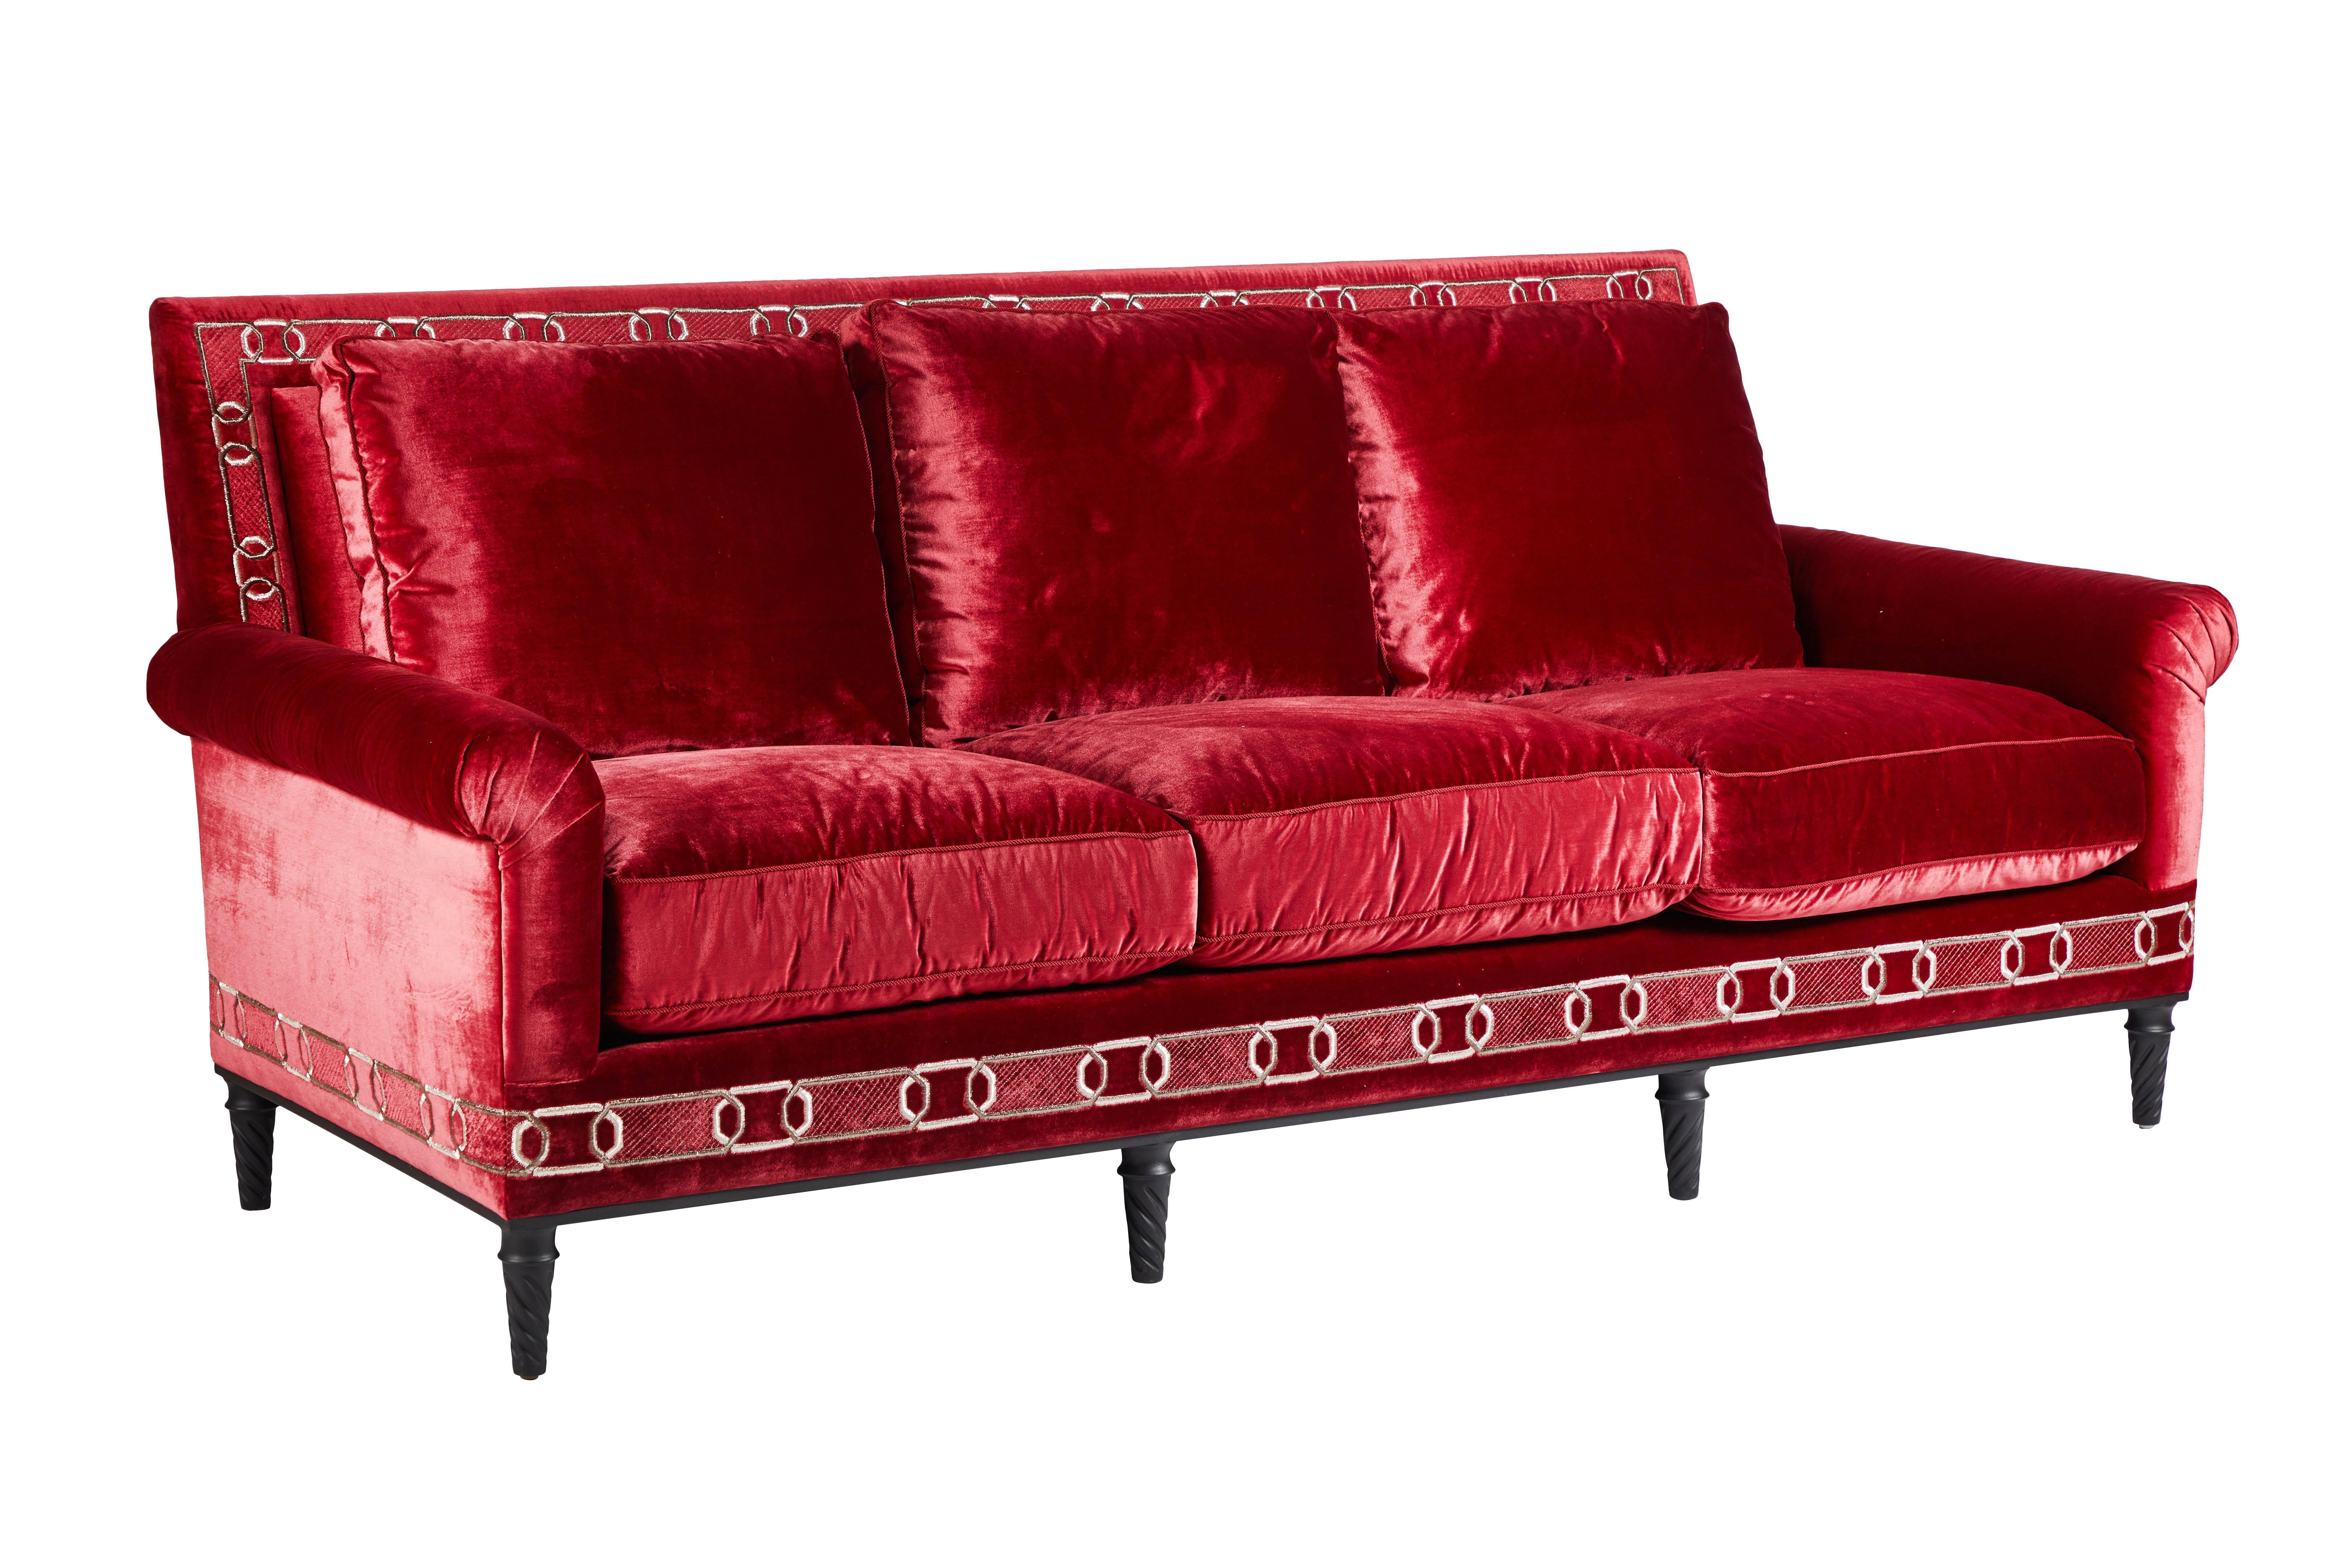 Brand new custom sofa in red silk velvet by Christopher Hyland. Custom embroidery along the deck and artfully placed on the interior back. Three loose seat cushions and three loose back cushions. Raised on 8 turned wood legs.

Measure: Arm height